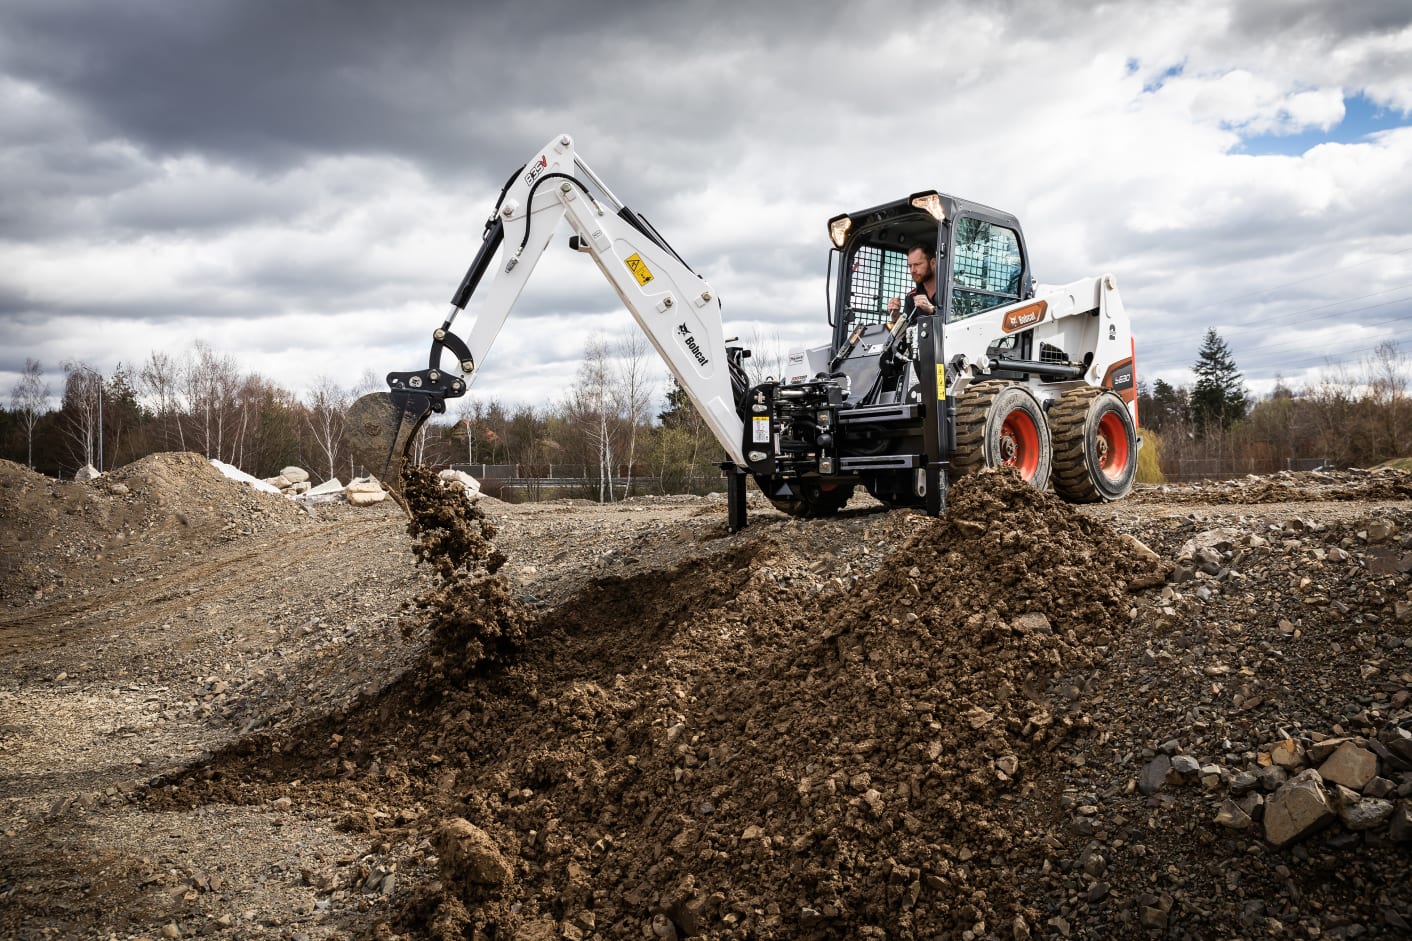 Browse Specs and more for the S630 Skid-Steer Loader - Bobcat of Indy